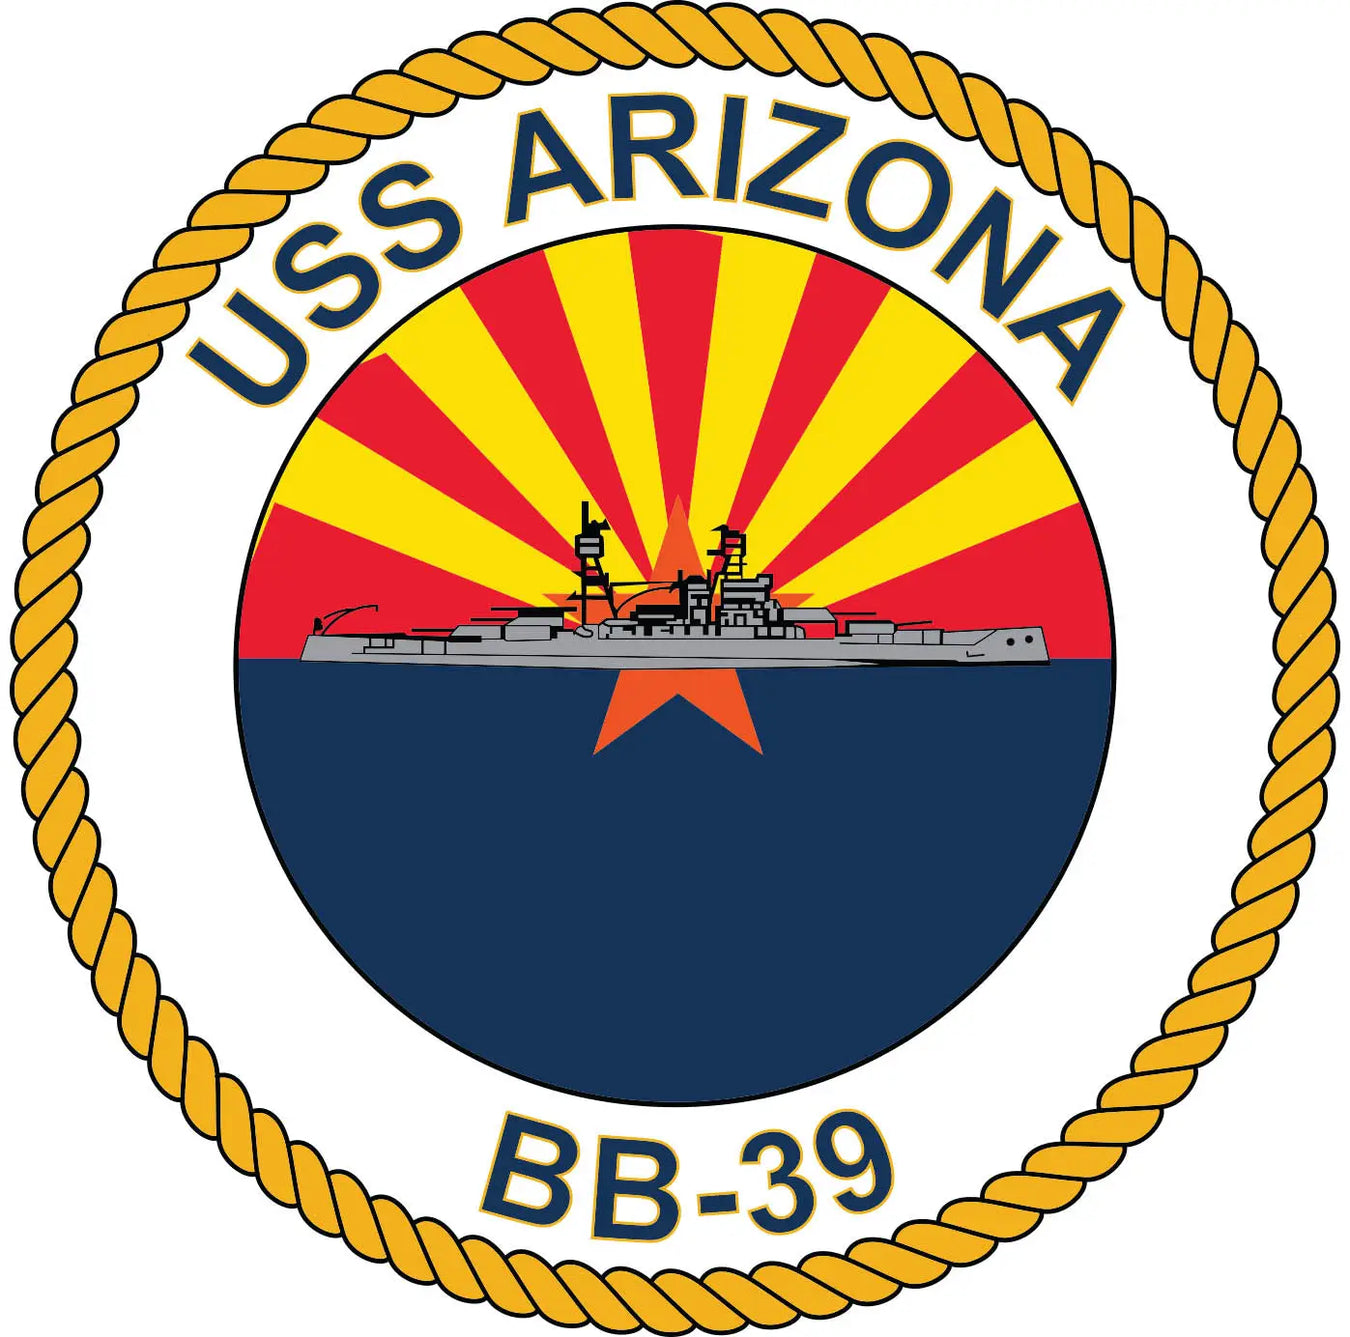 USS Arizona (BB-39) Merchandise - Shop T-Shirts, hoodies, patches, pins, flags, decals, hats and more.